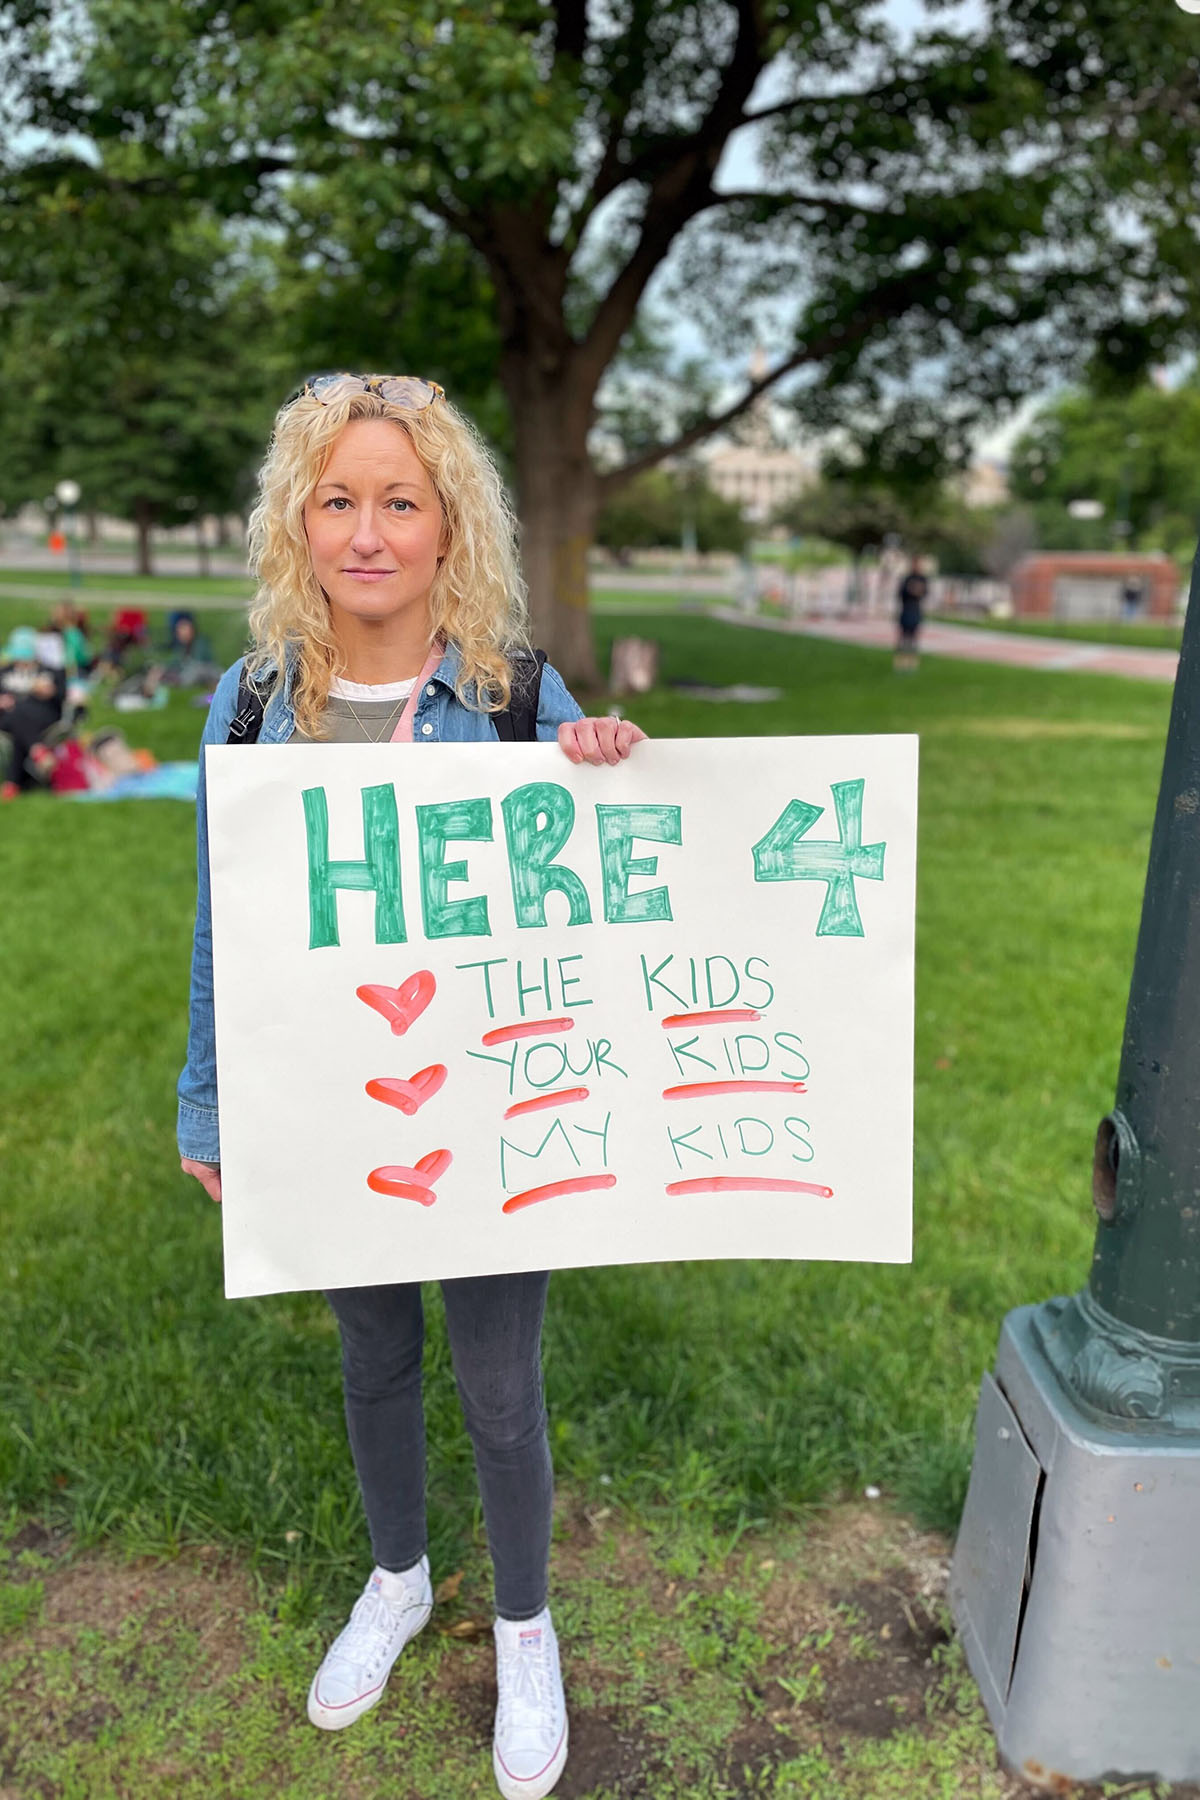 Katie MacKenzie, a participants in the sit in poses for a portrait near the Colorado State Capitol. She holds a sign that reads "Here 4 The Kids, Your Kids, My Kids."